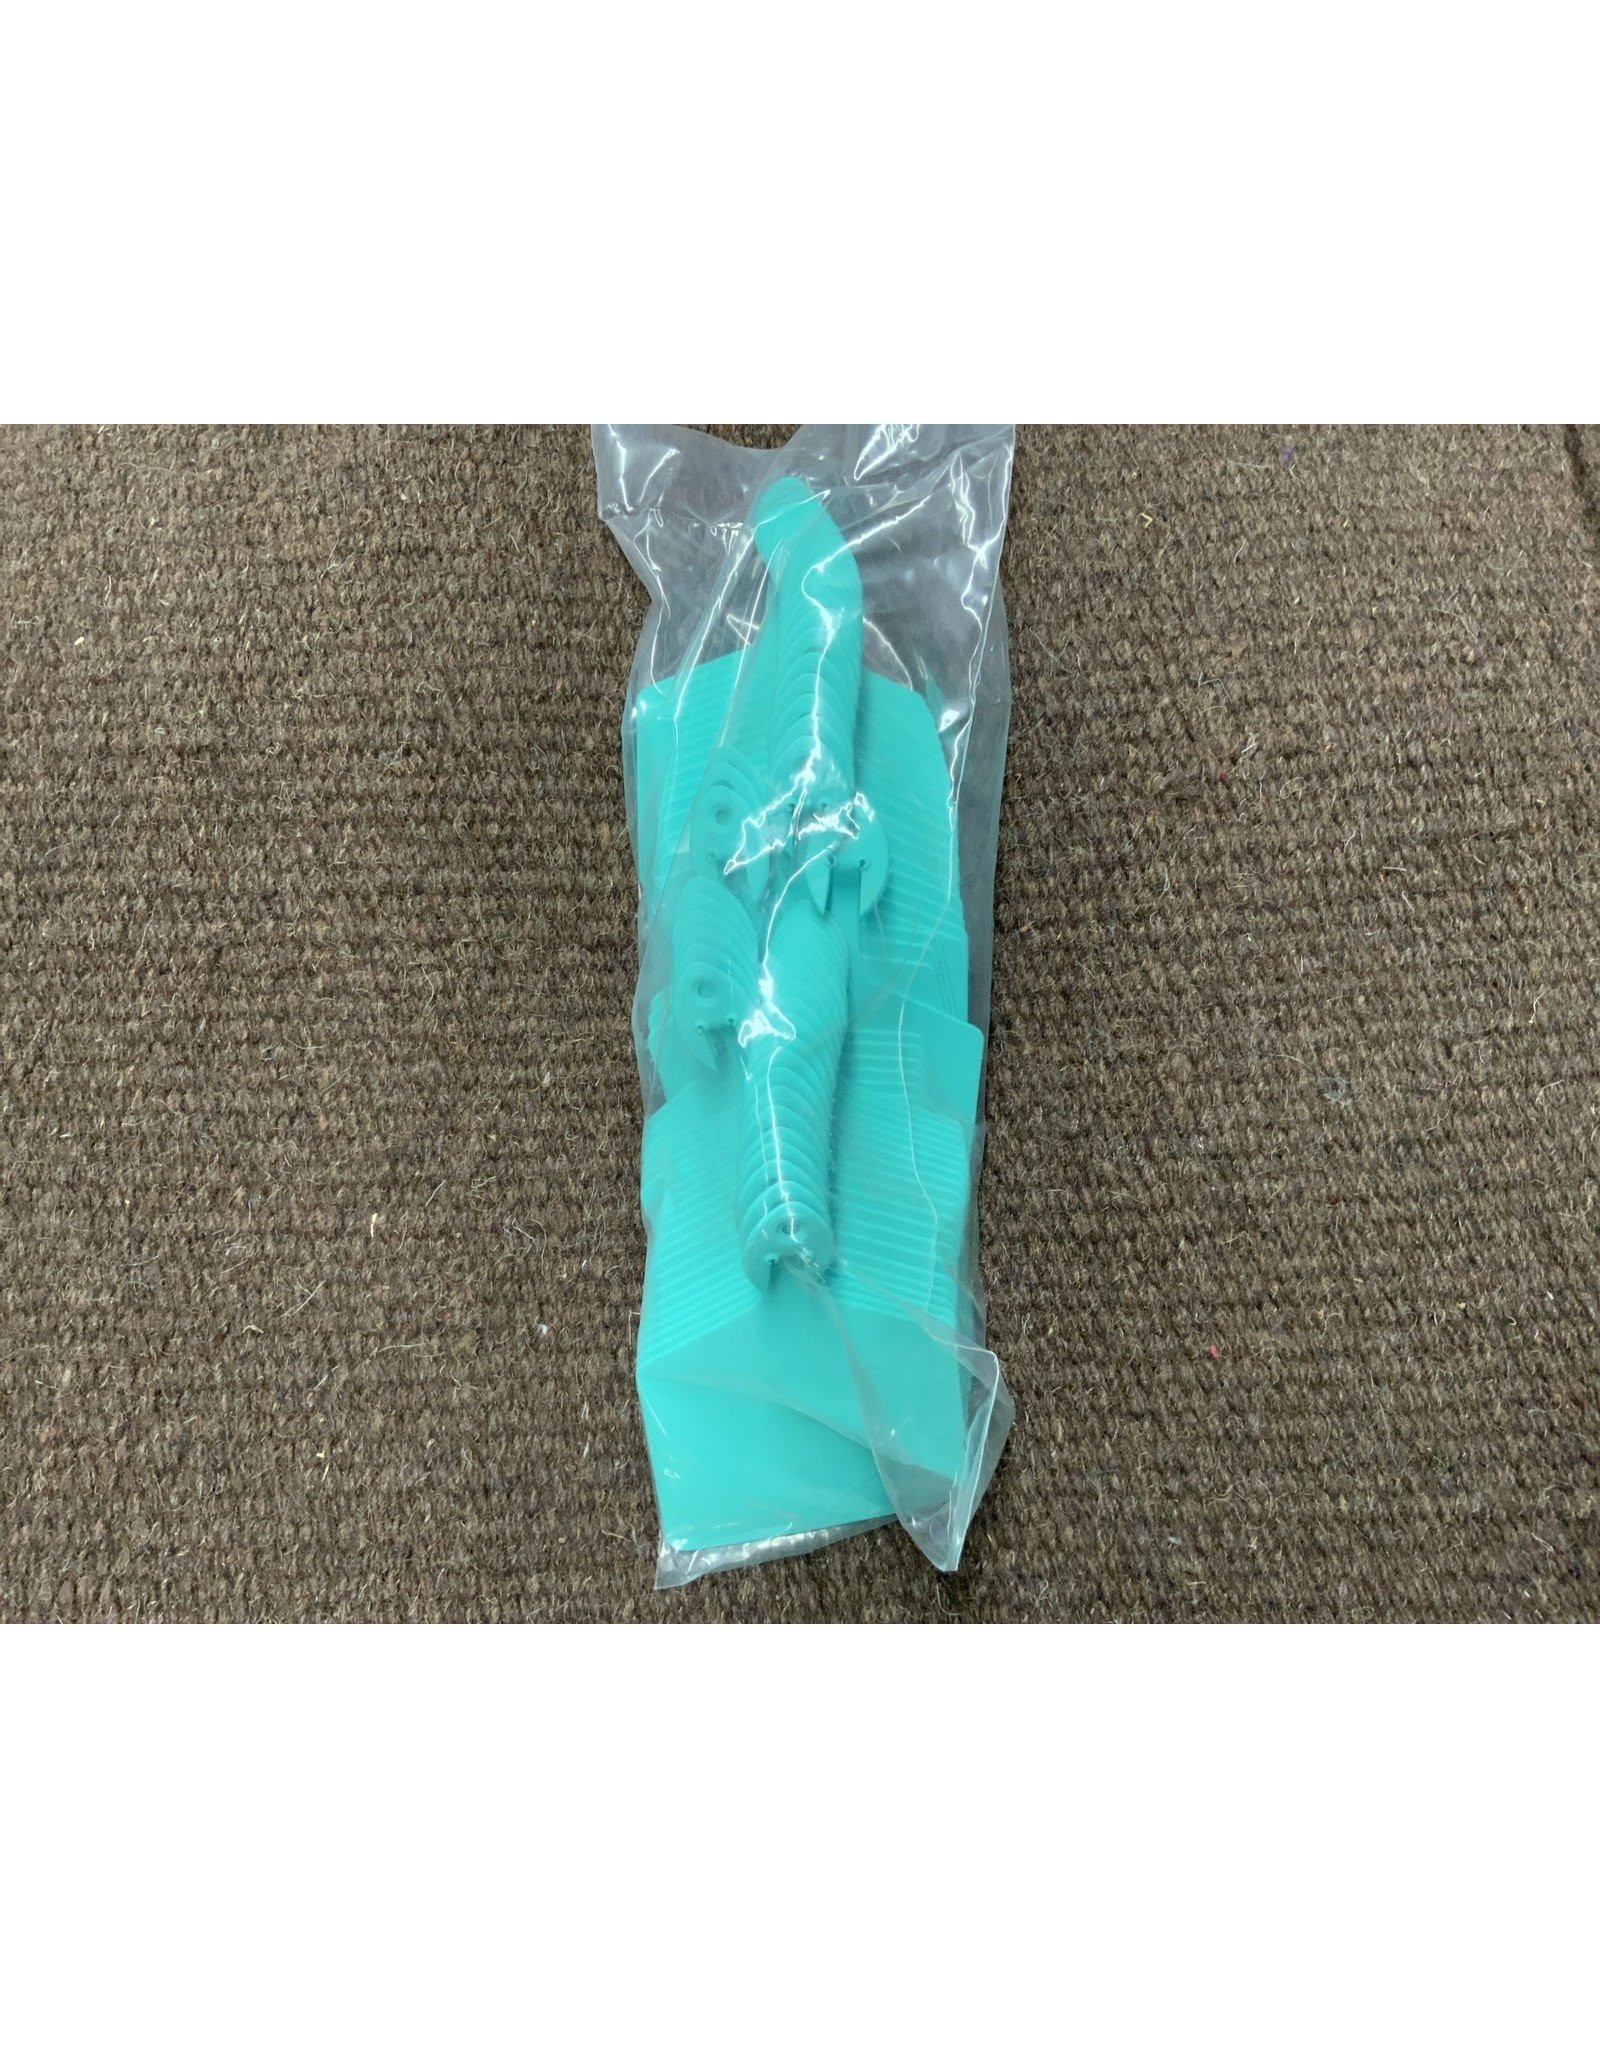 TAG* Allflex Feedlot Tag -  Turquoise - FEEDLOLTQ 50pcs  long package